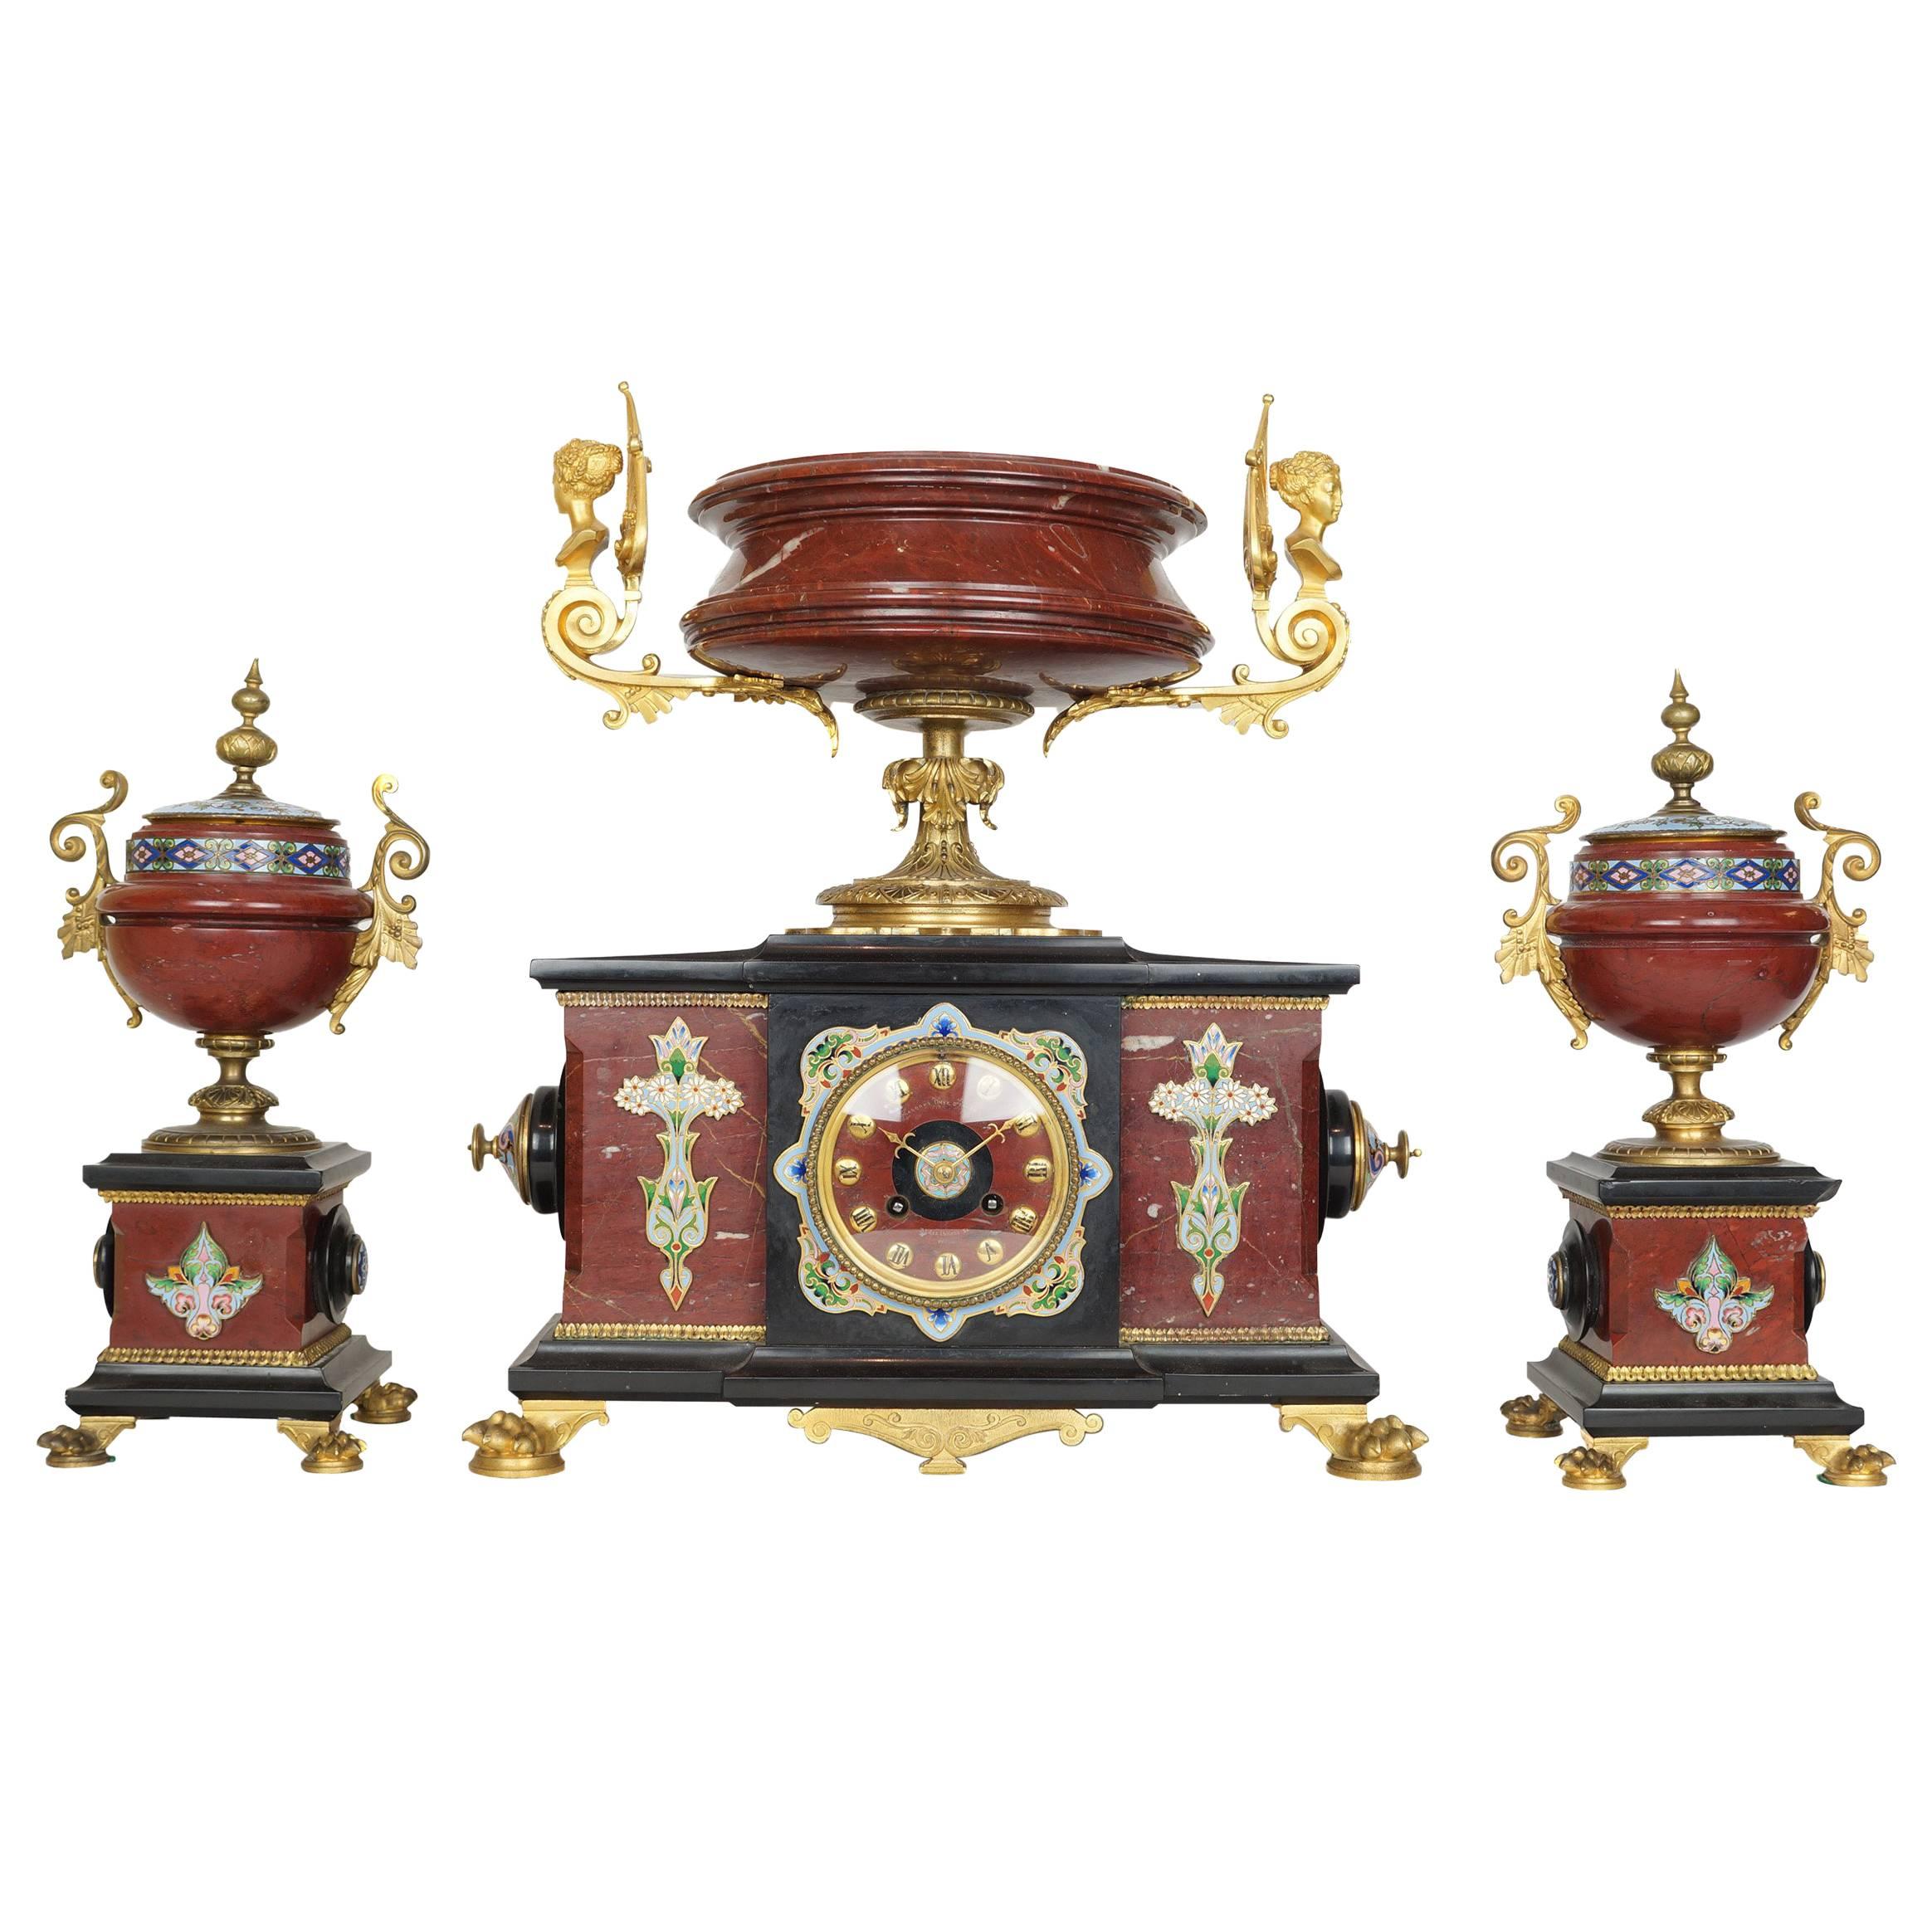 Three-Piece Rouge Marble, Bronze and Champleve Enamel Clock Ganiture Set